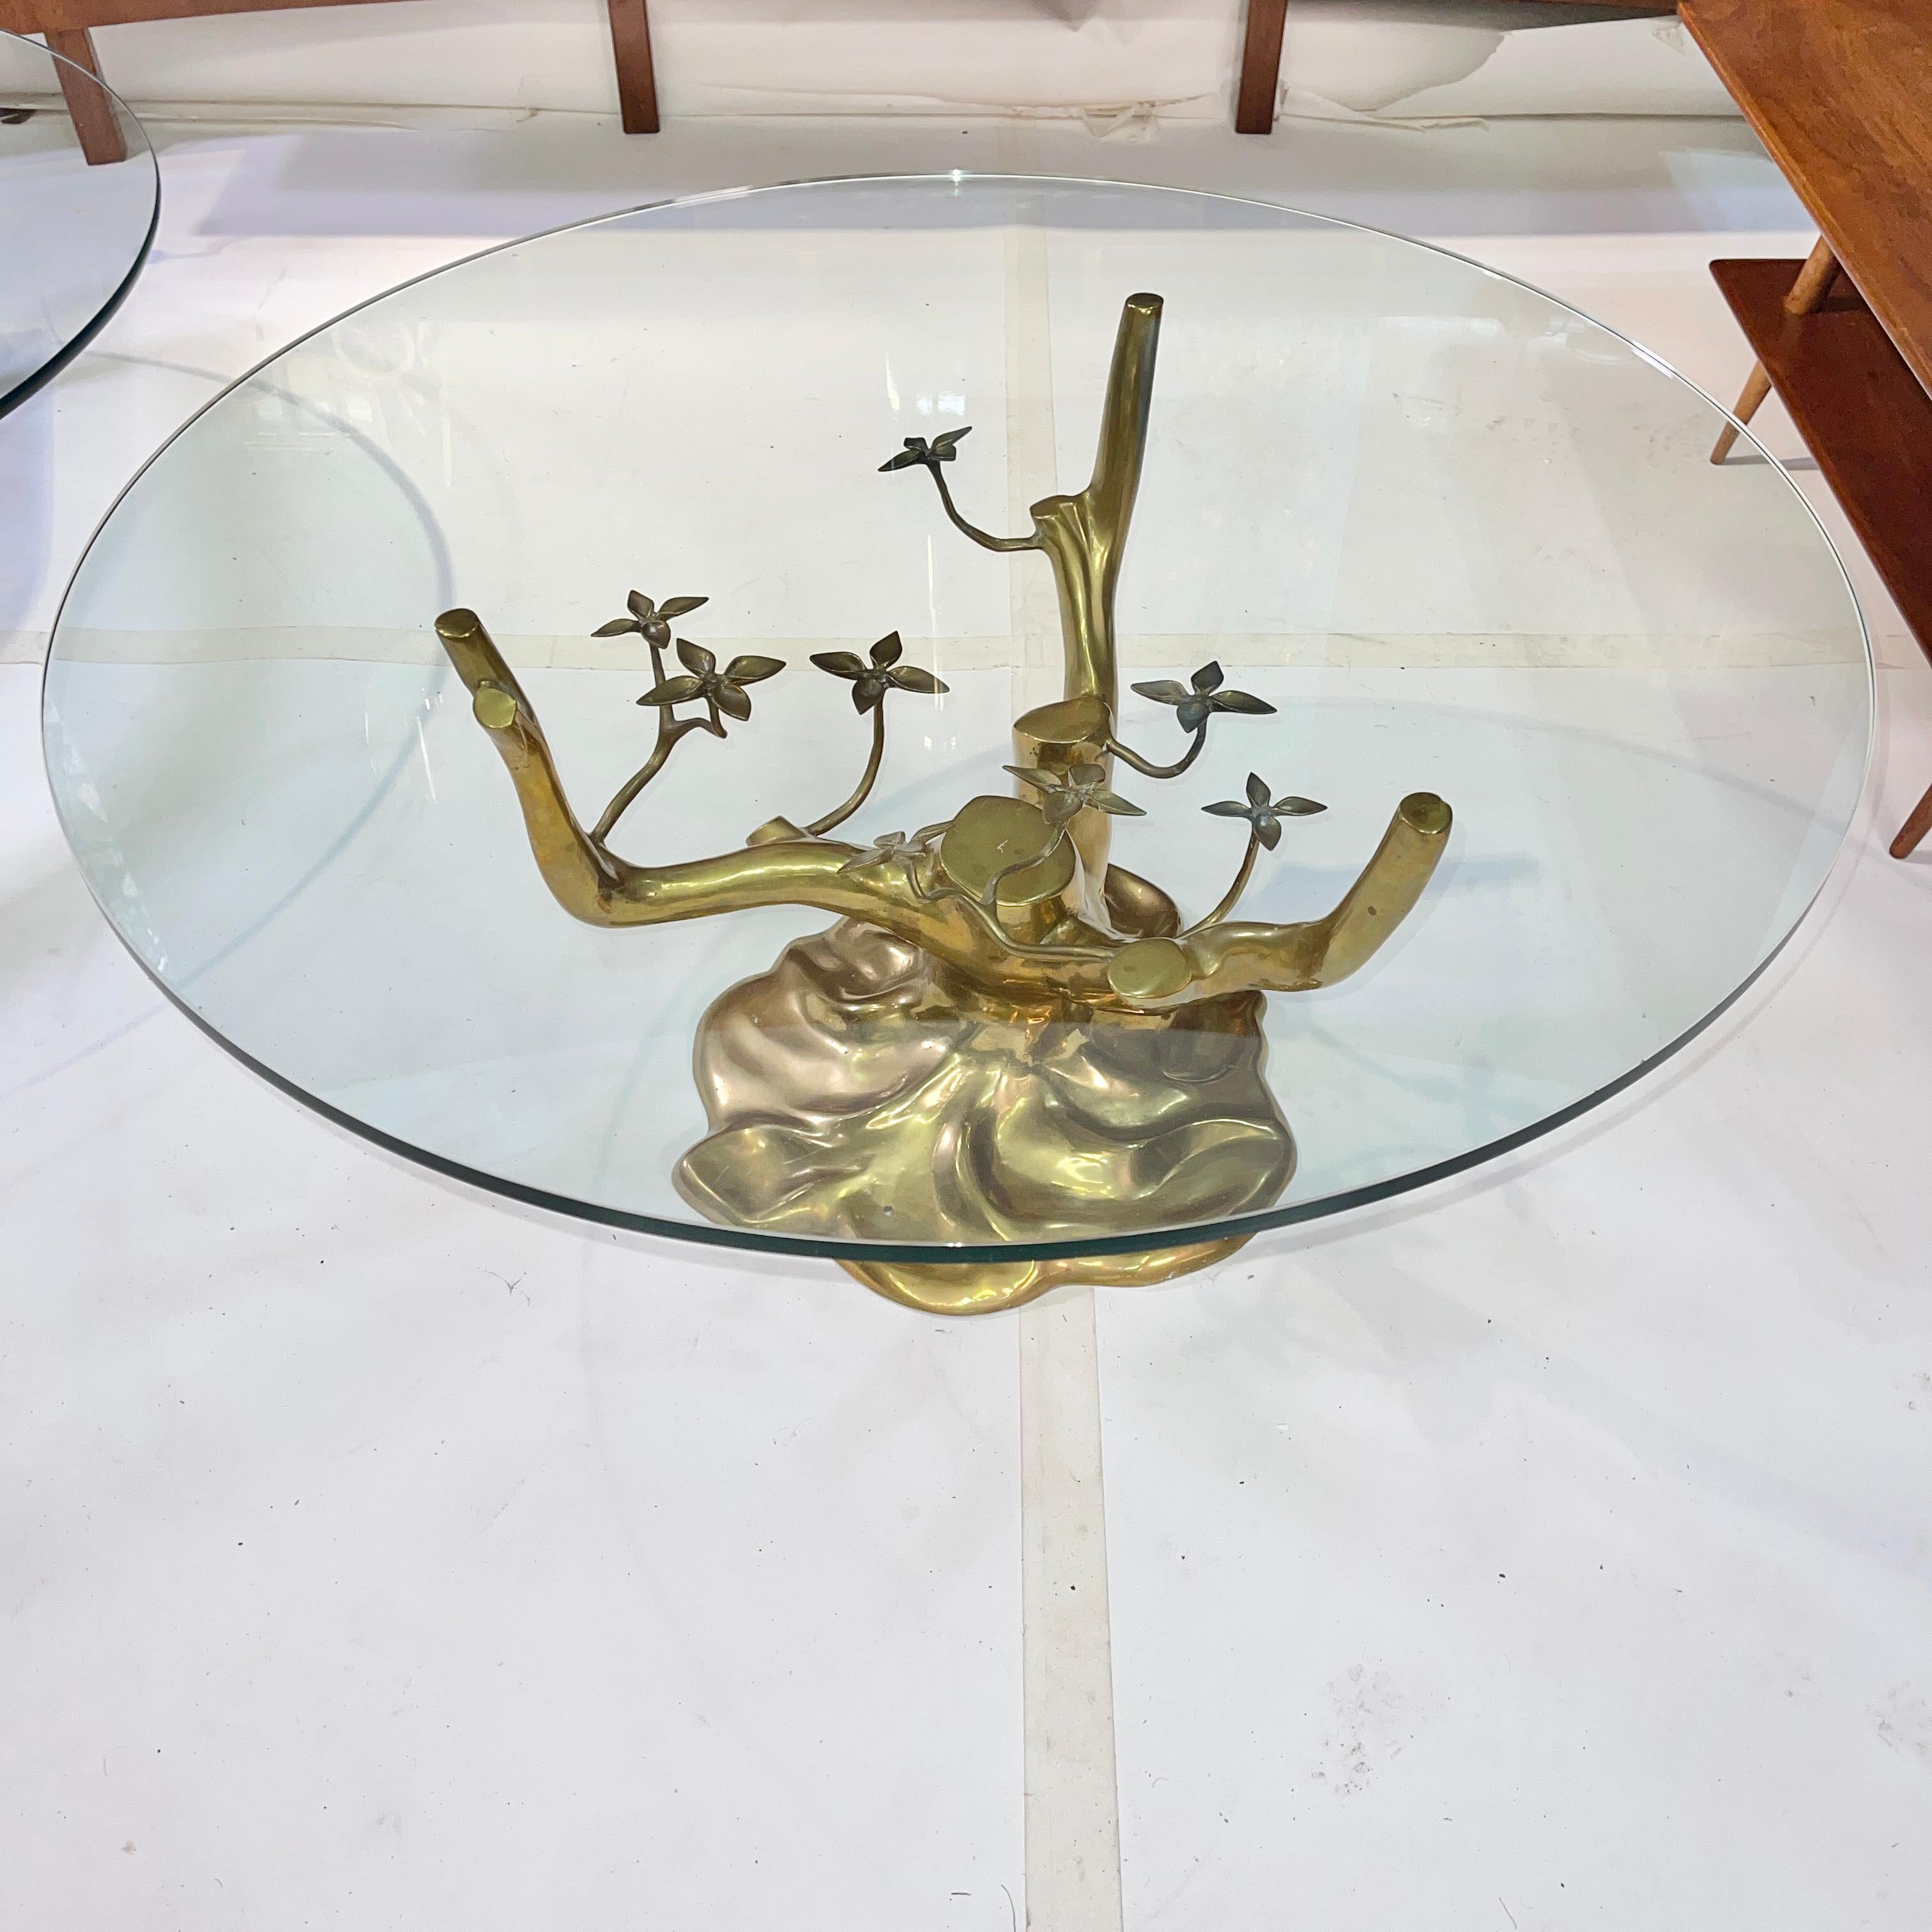 Sculpted and polished cast brass (bonsai) tree base table with three arms supporting a half inch thick round glass top 36 inches diameter.
Base alone is 17 inches high and 20 inches diameter.